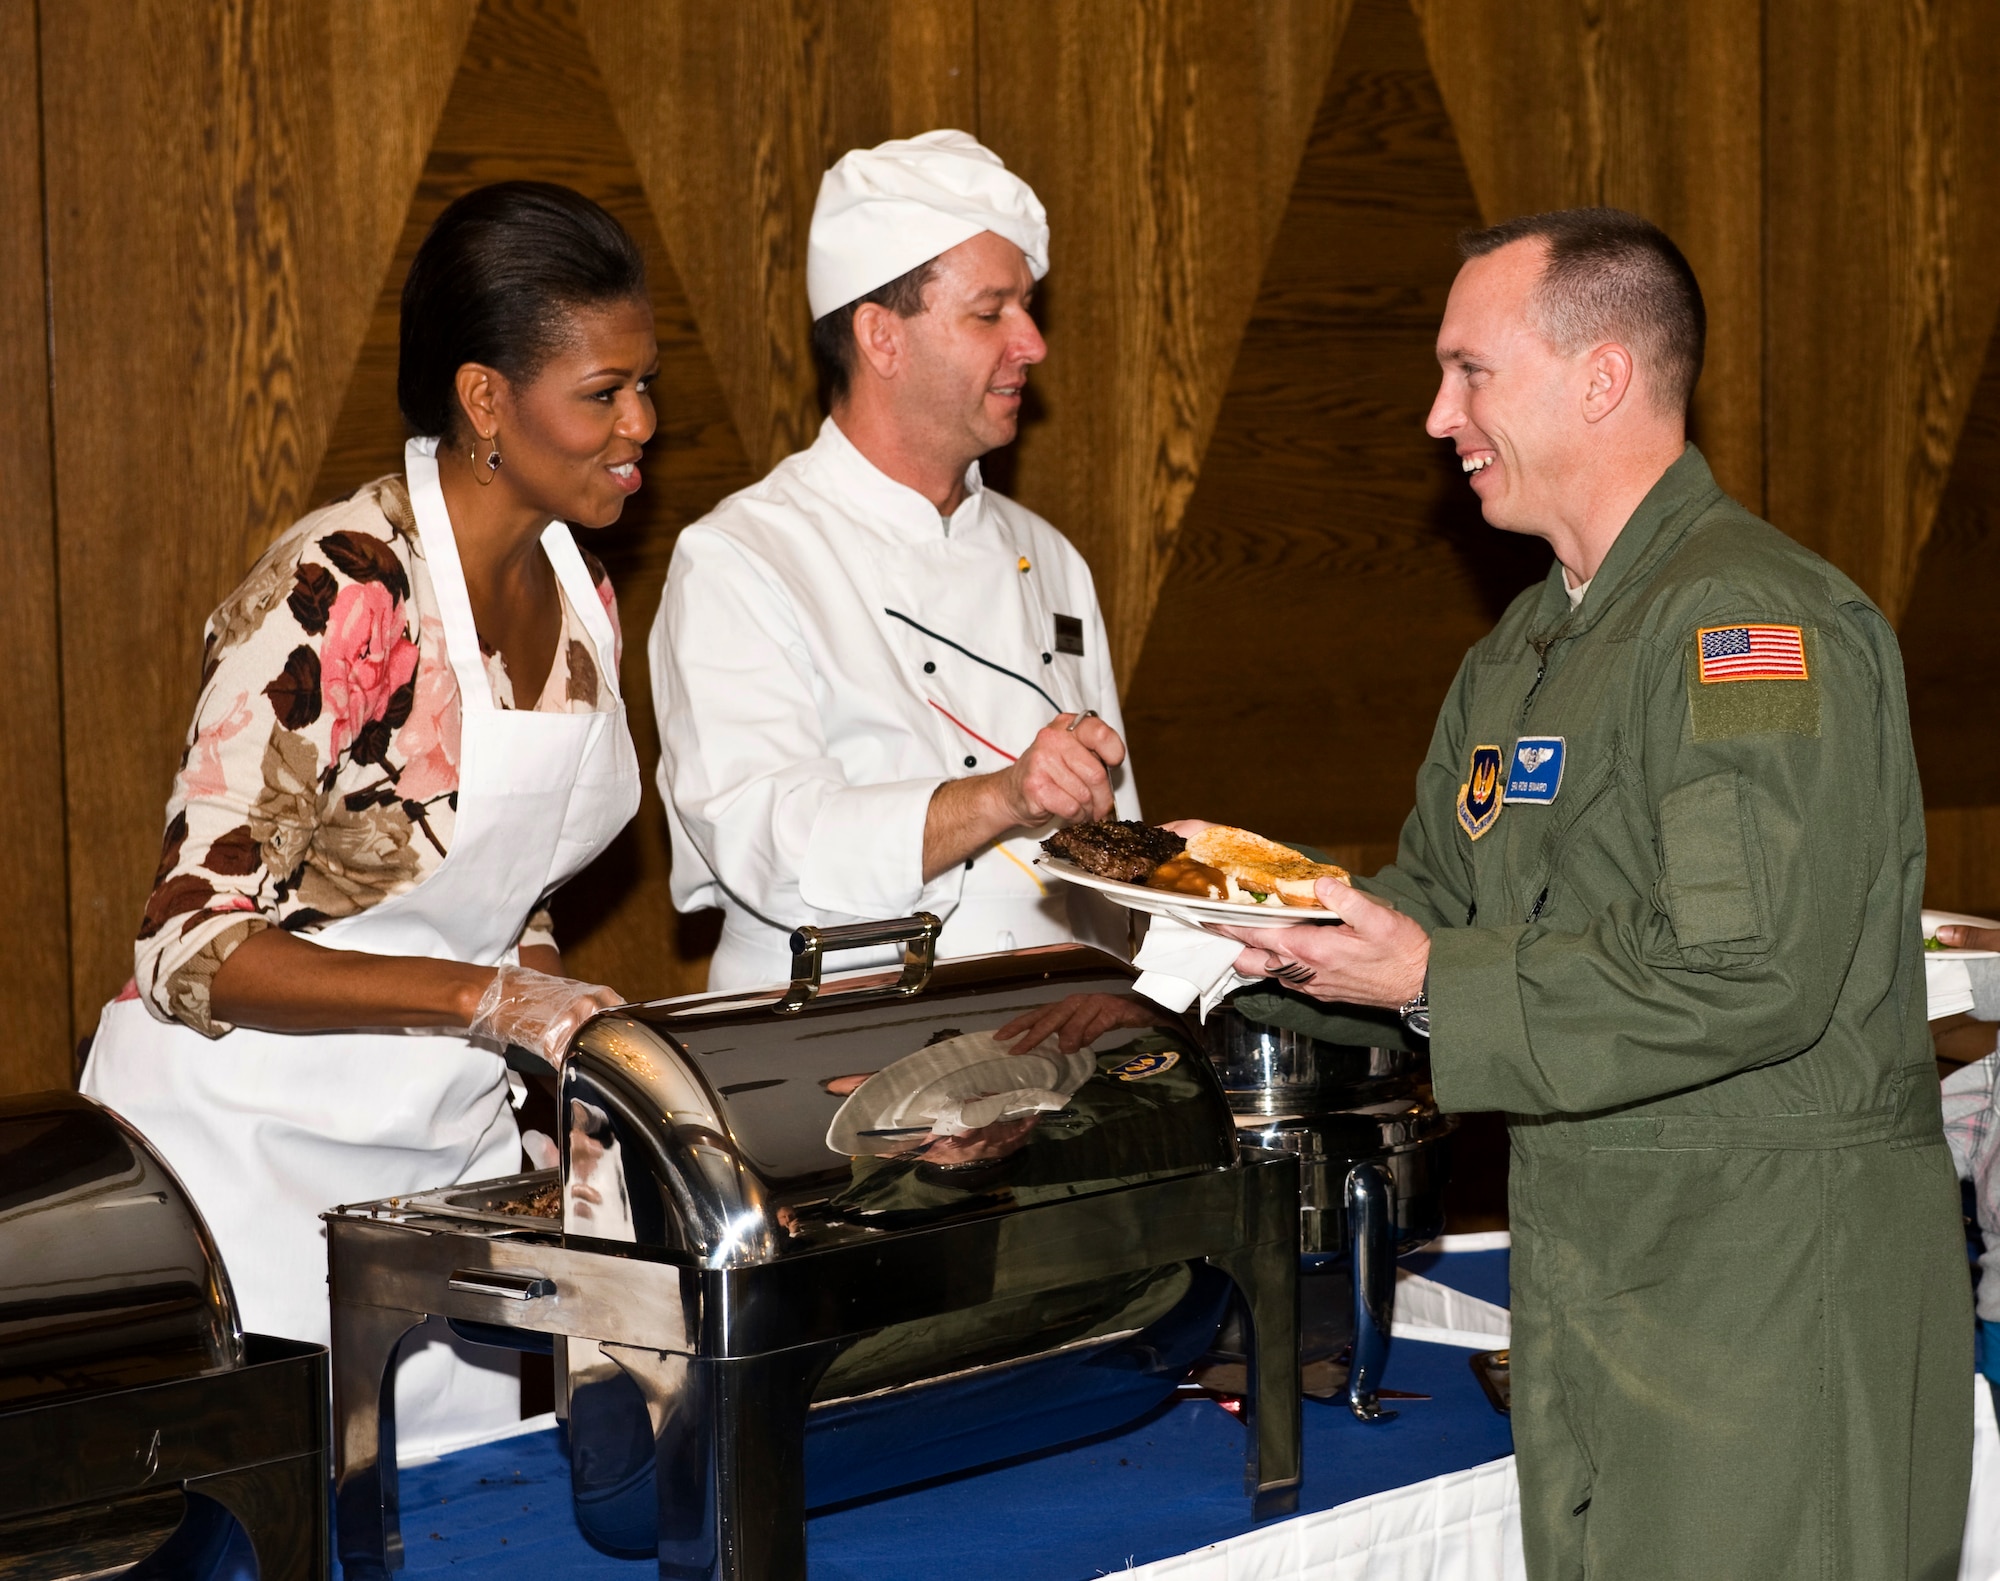 First Lady Michelle Obama talks with Senior Airman Rob Binard, 86th Aeromedical Evacuation Squadron, during a Veterans Day dinner at the Ramstein Air Base, Germany, Officers Club, Nov. 11, 2010. The First Lady made a surprise visit to Ramstein during her return from a nine-day tour of Asia to show her support for servicemembers and their families during this Veterans Day. She met with wounded servicemembers at Landstuhl Regional Medical Center, served lunch, talked briefly to the servicemembers and families and met with German first lady Bettina Wulff before flying on to the United States. (U.S. Air Force photo/Tech. Sgt. Wayne Clark) 